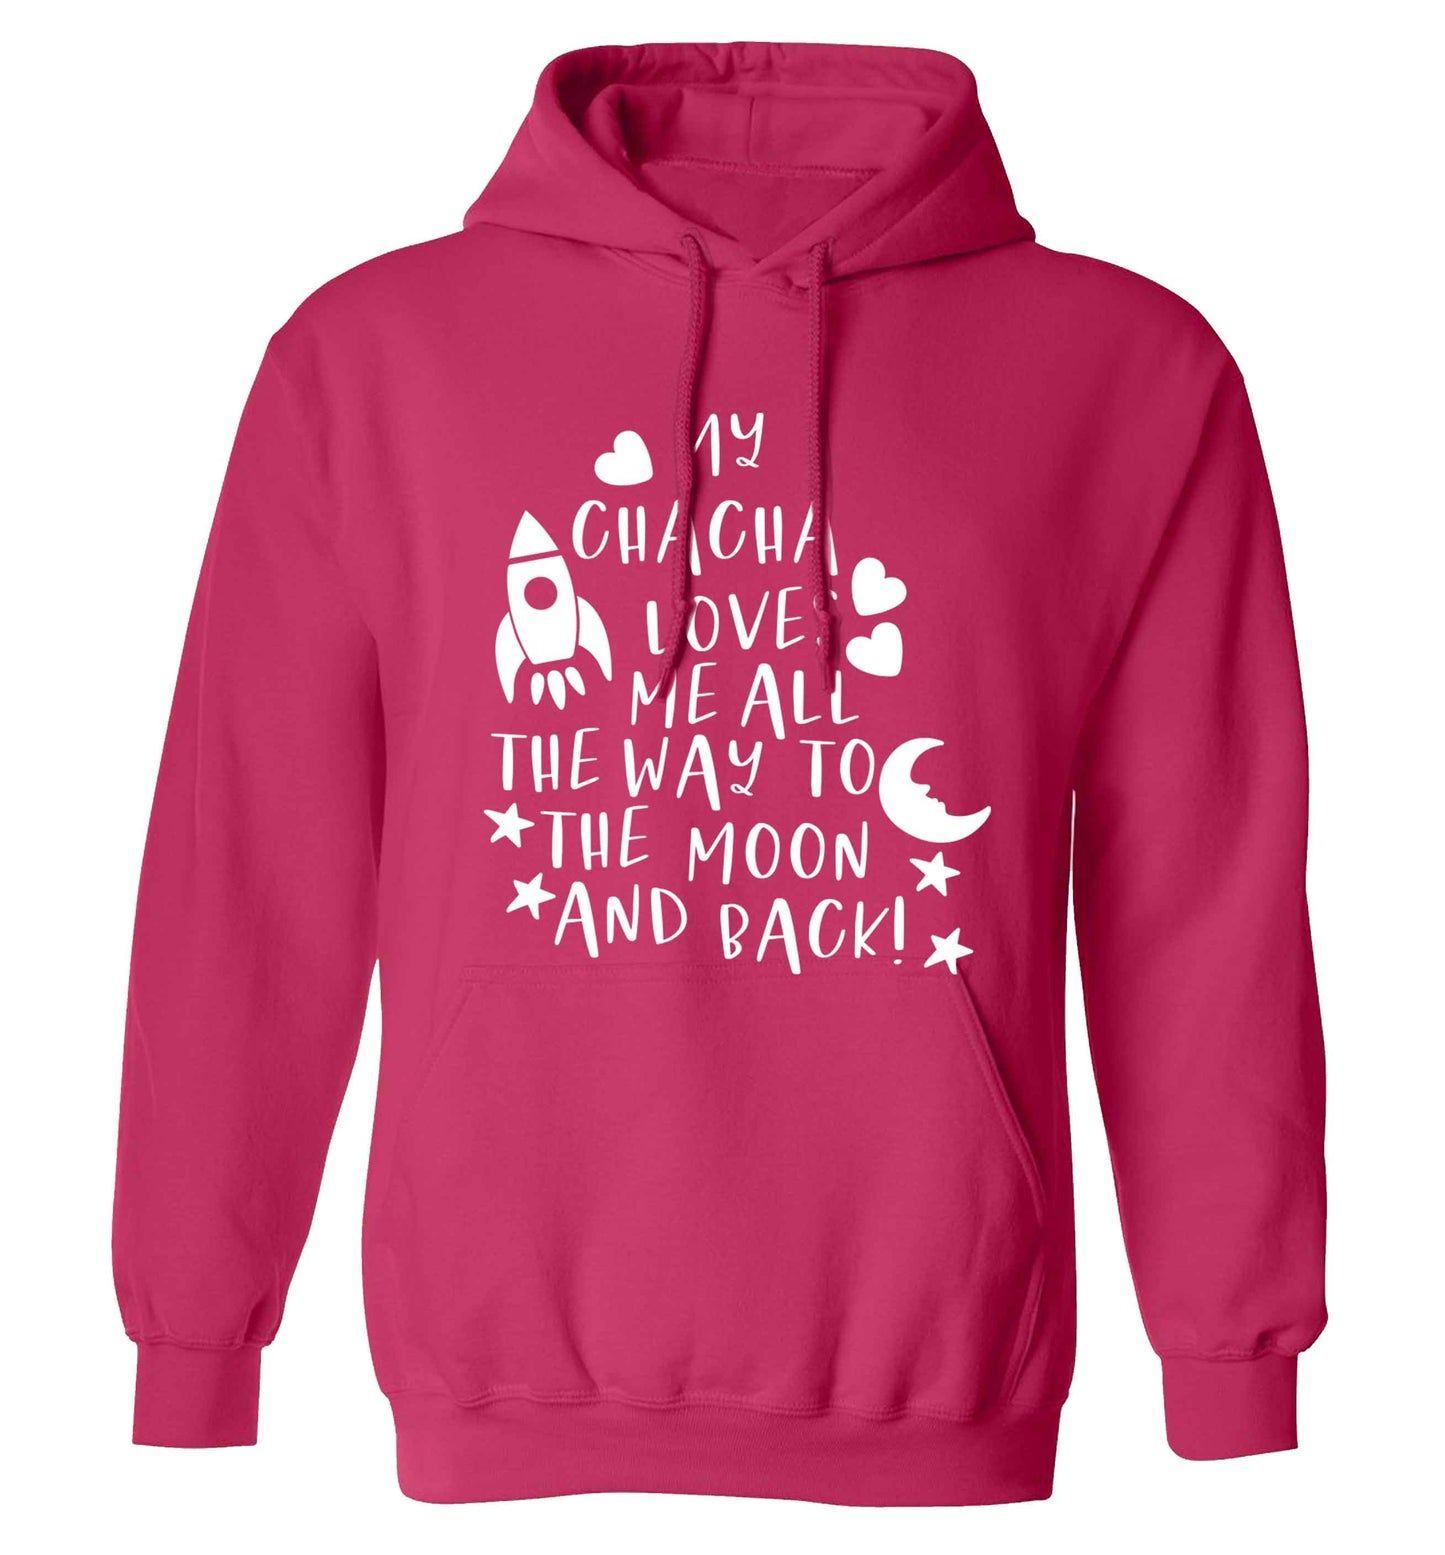 My chacha loves me all the way to the moon and back adults unisex pink hoodie 2XL